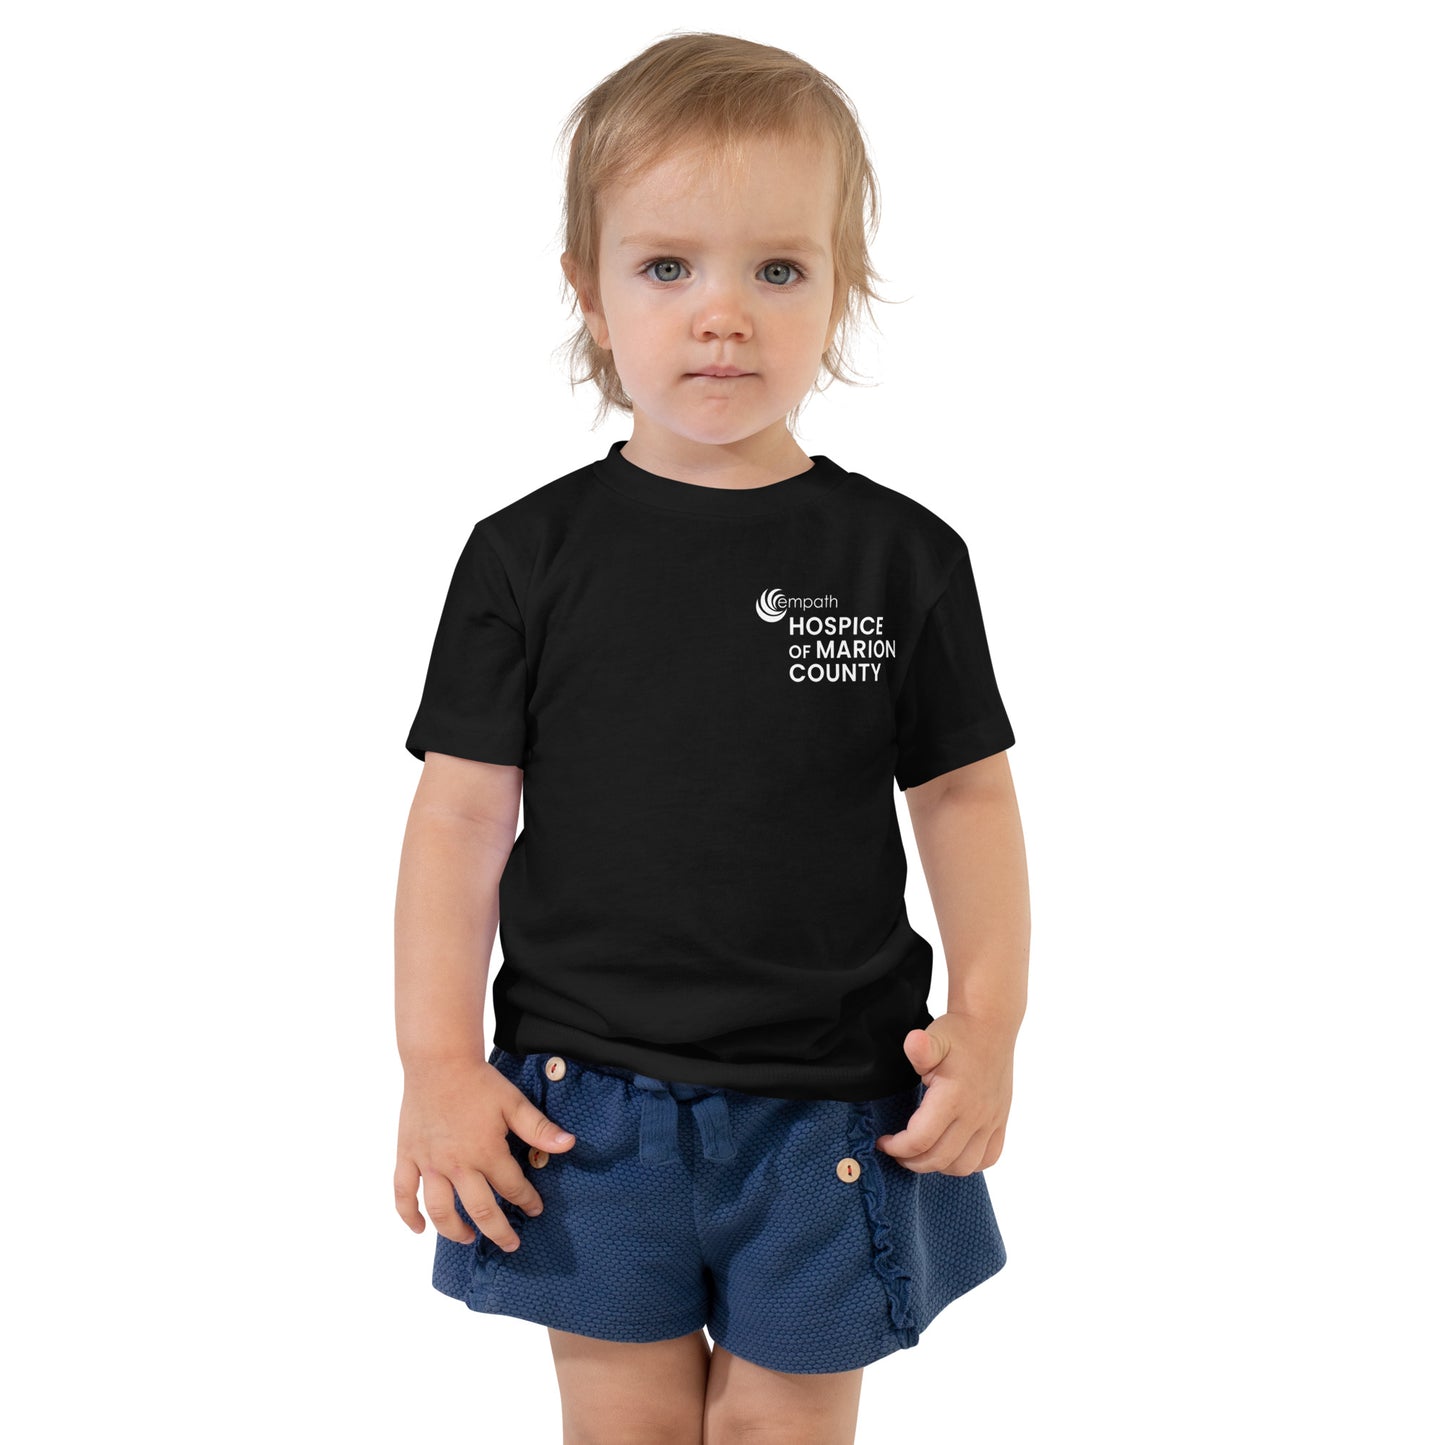 Toddler Short Sleeve Tee - Hospice of Marion County